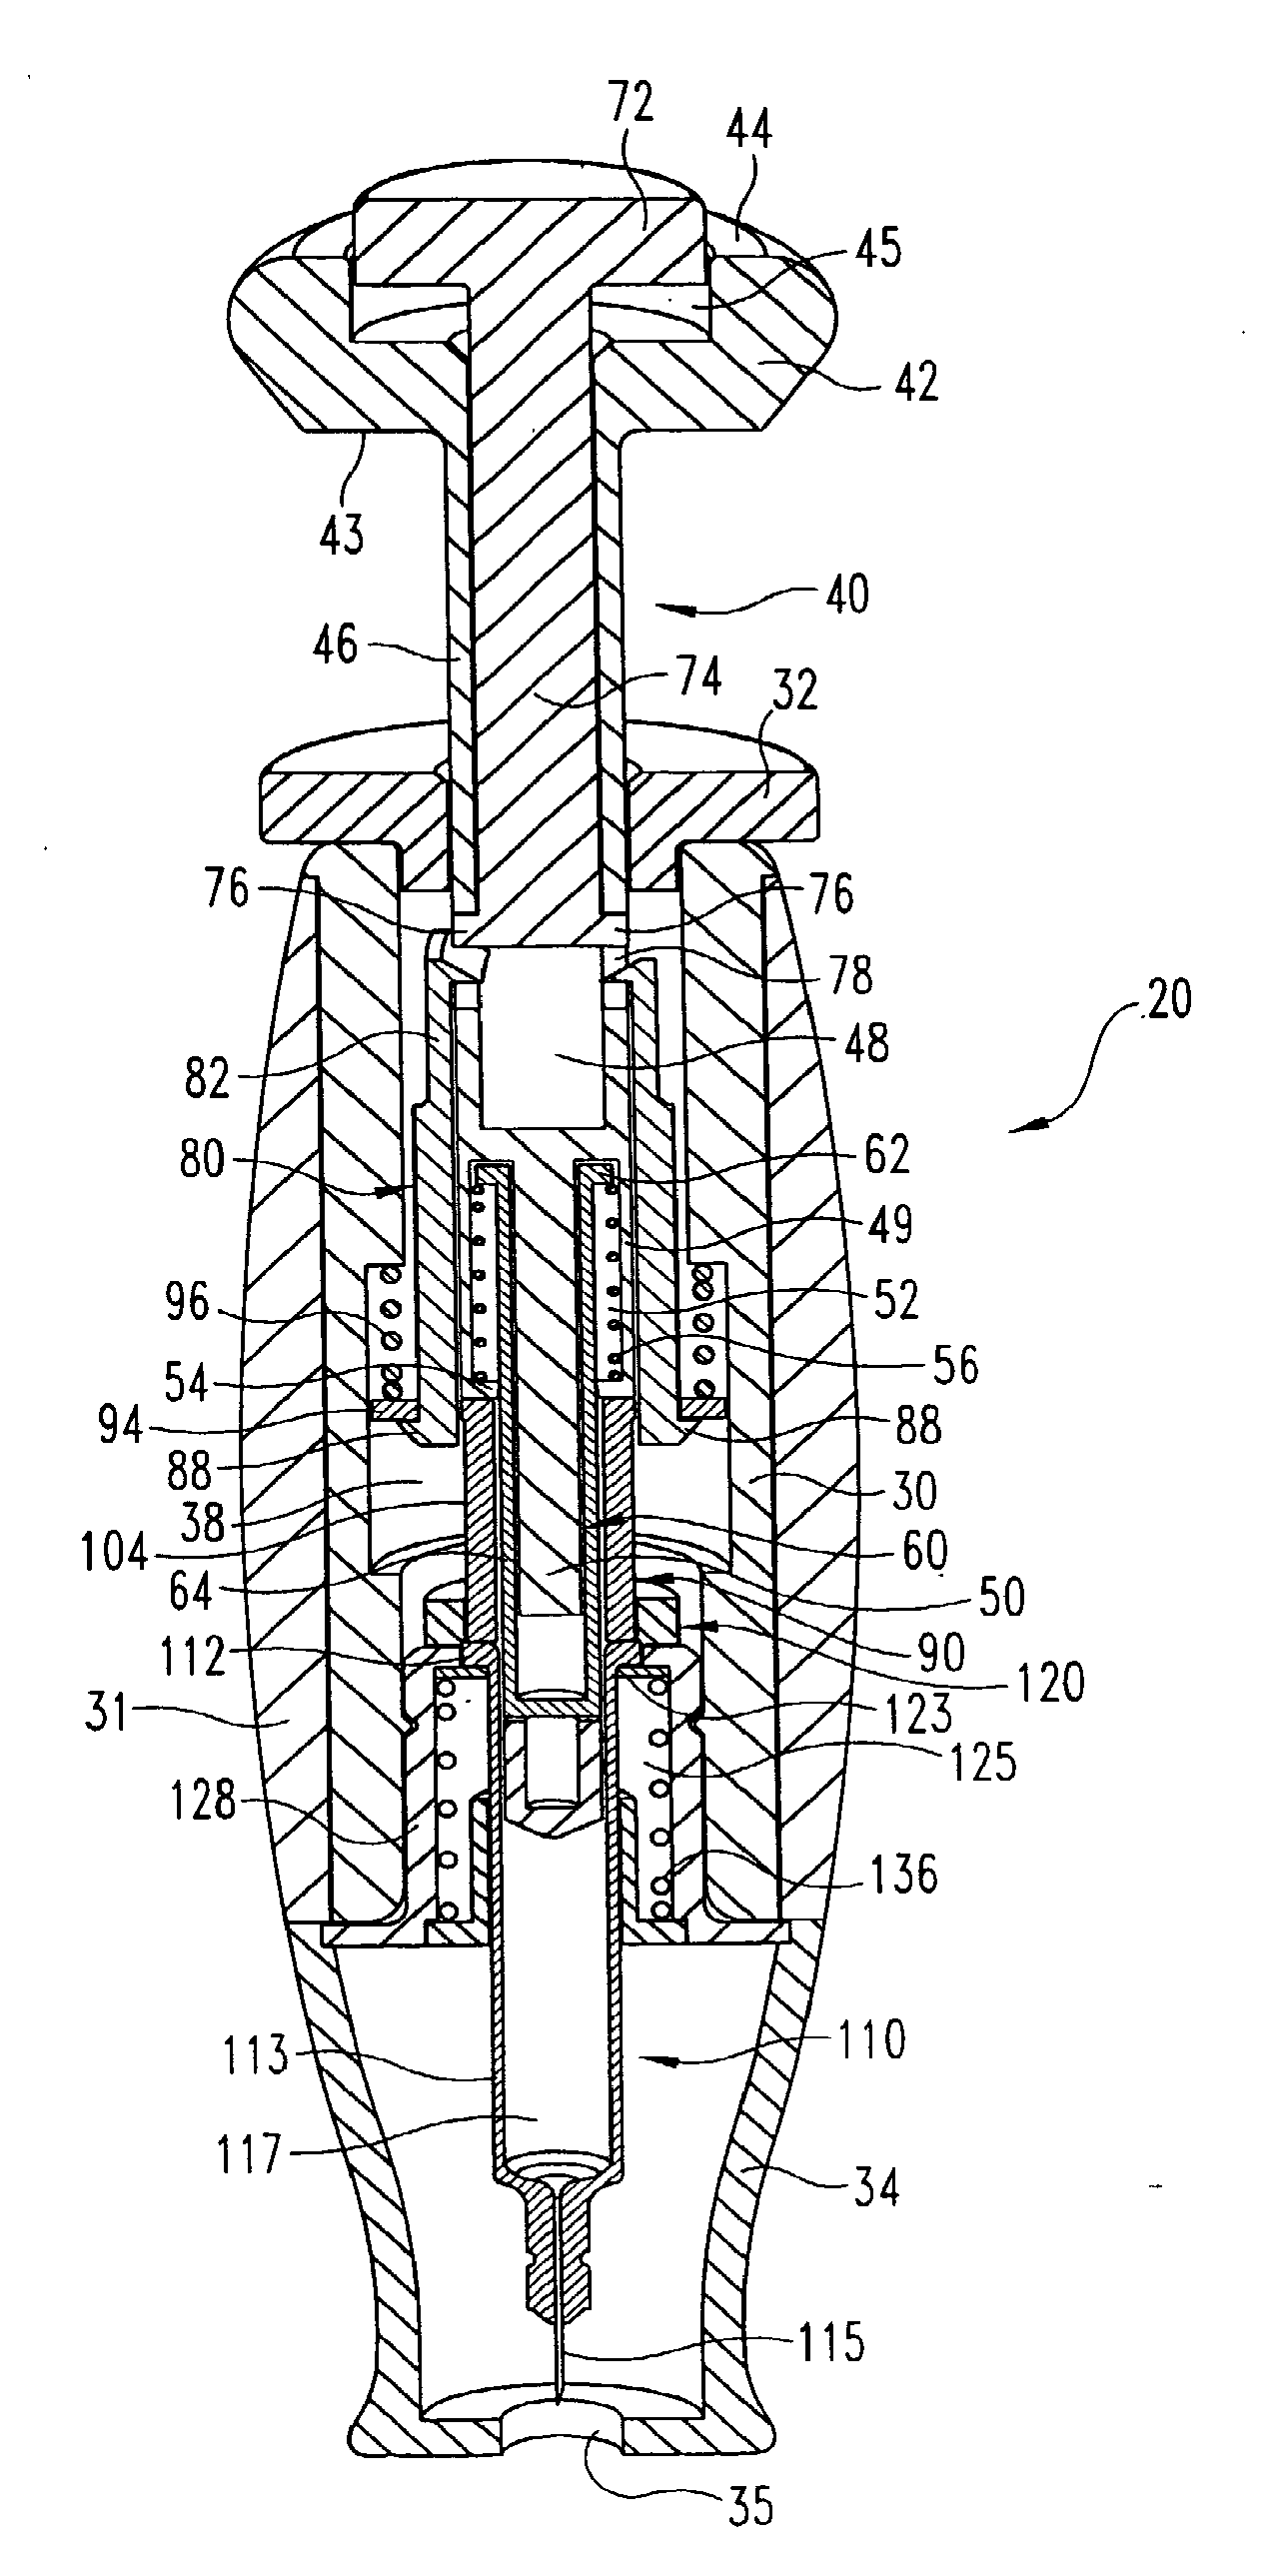 Needled pharmaceutical delivery device with triggered automatic needle insertion and manually controlled pharmaceutical injection